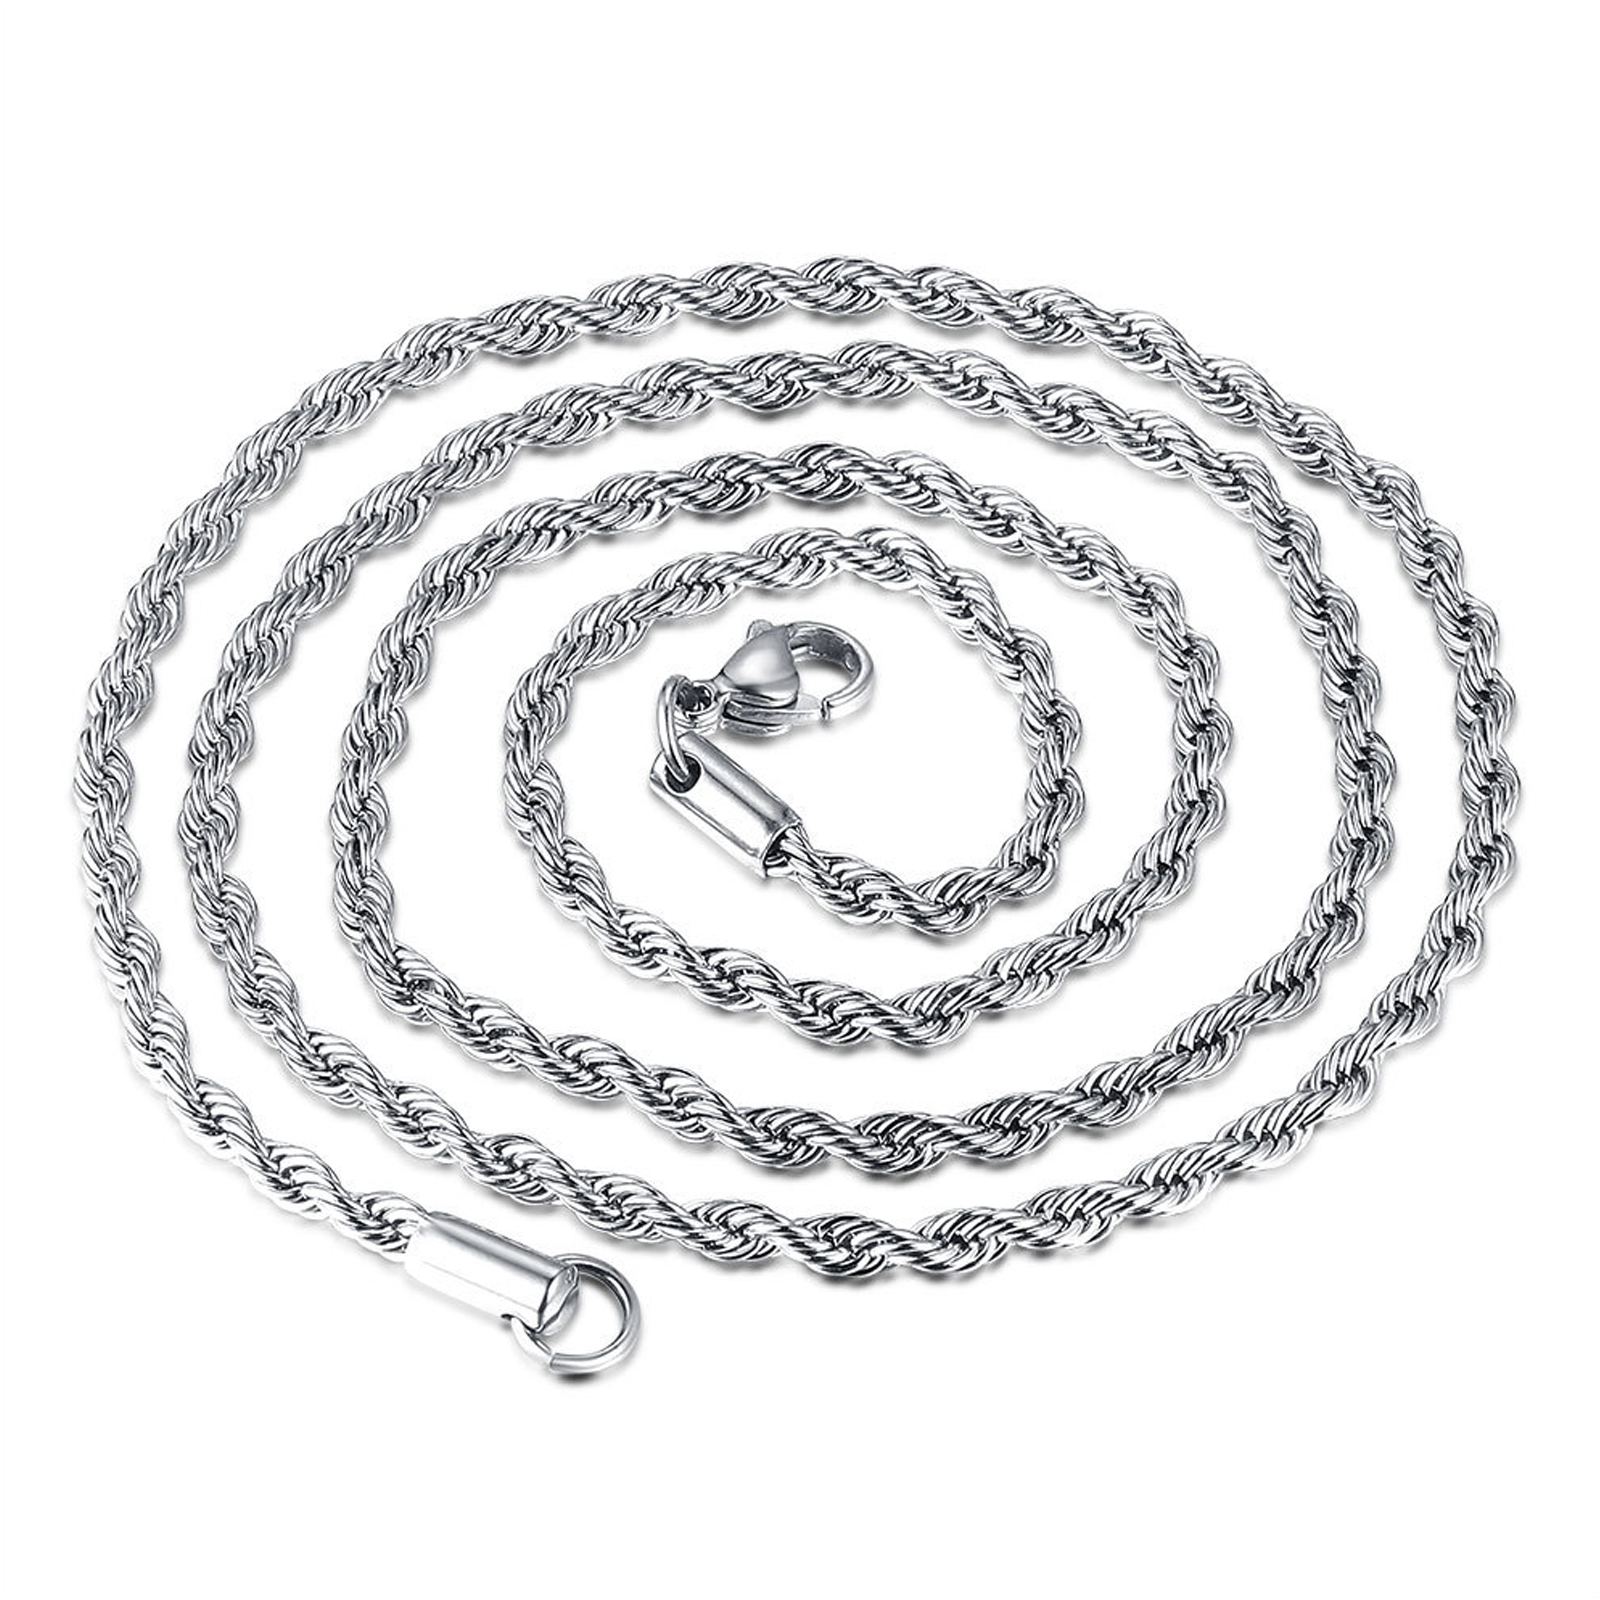 Picture of Stainless Steel Braided Rope Chain Necklace Silver Tone 51cm(20 1/8") long, 1 Piece